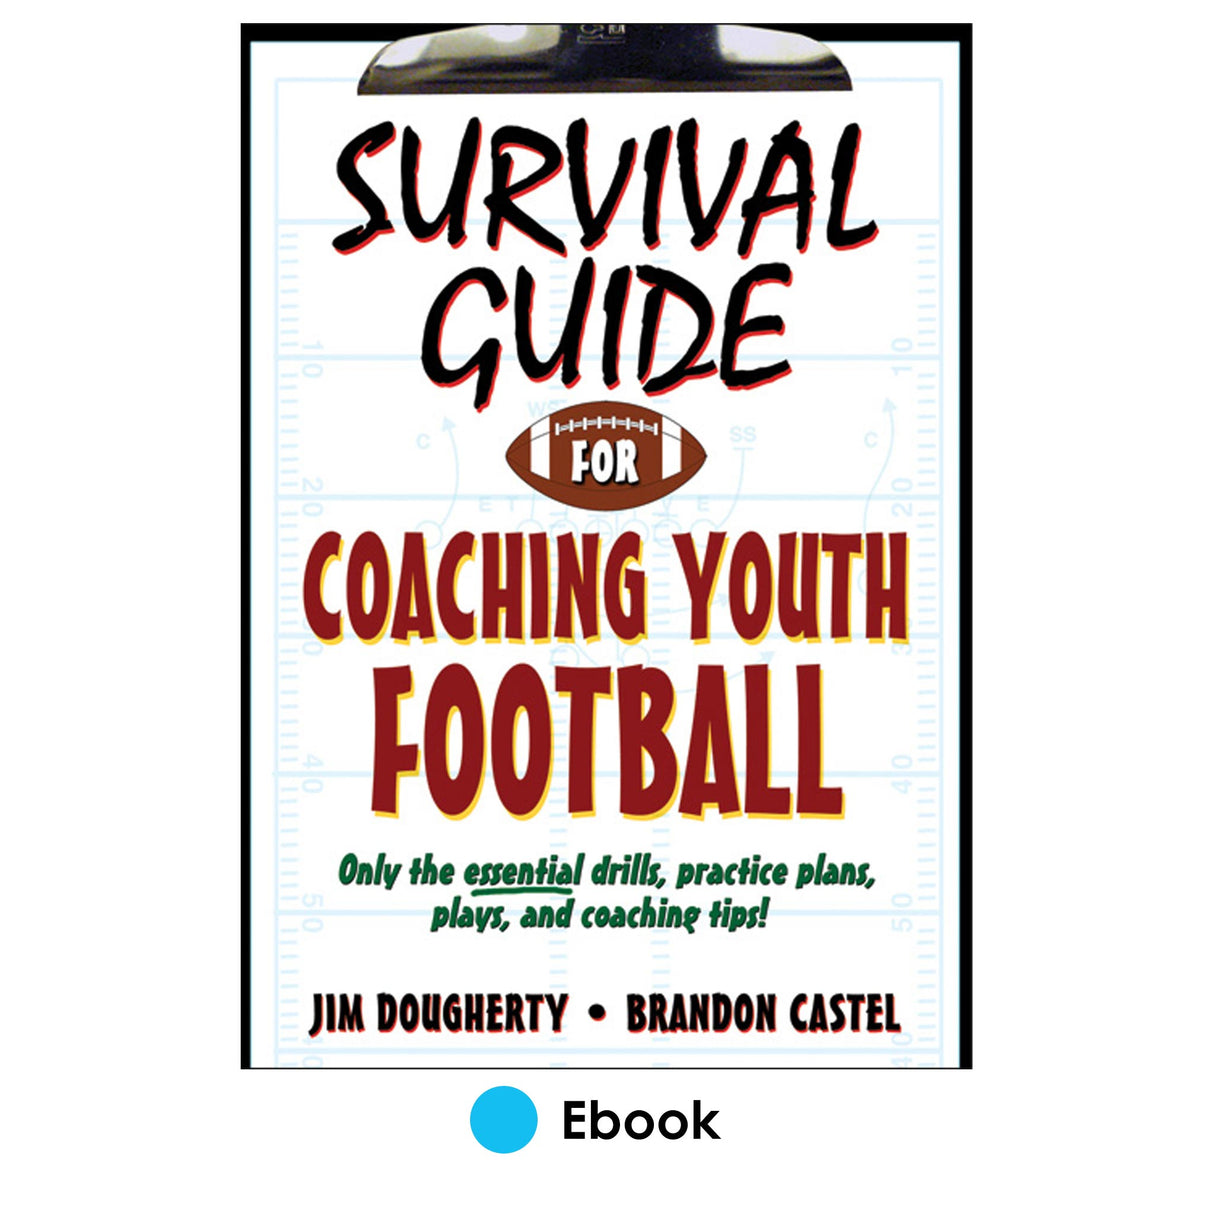 Survival Guide for Coaching Youth Football PDF